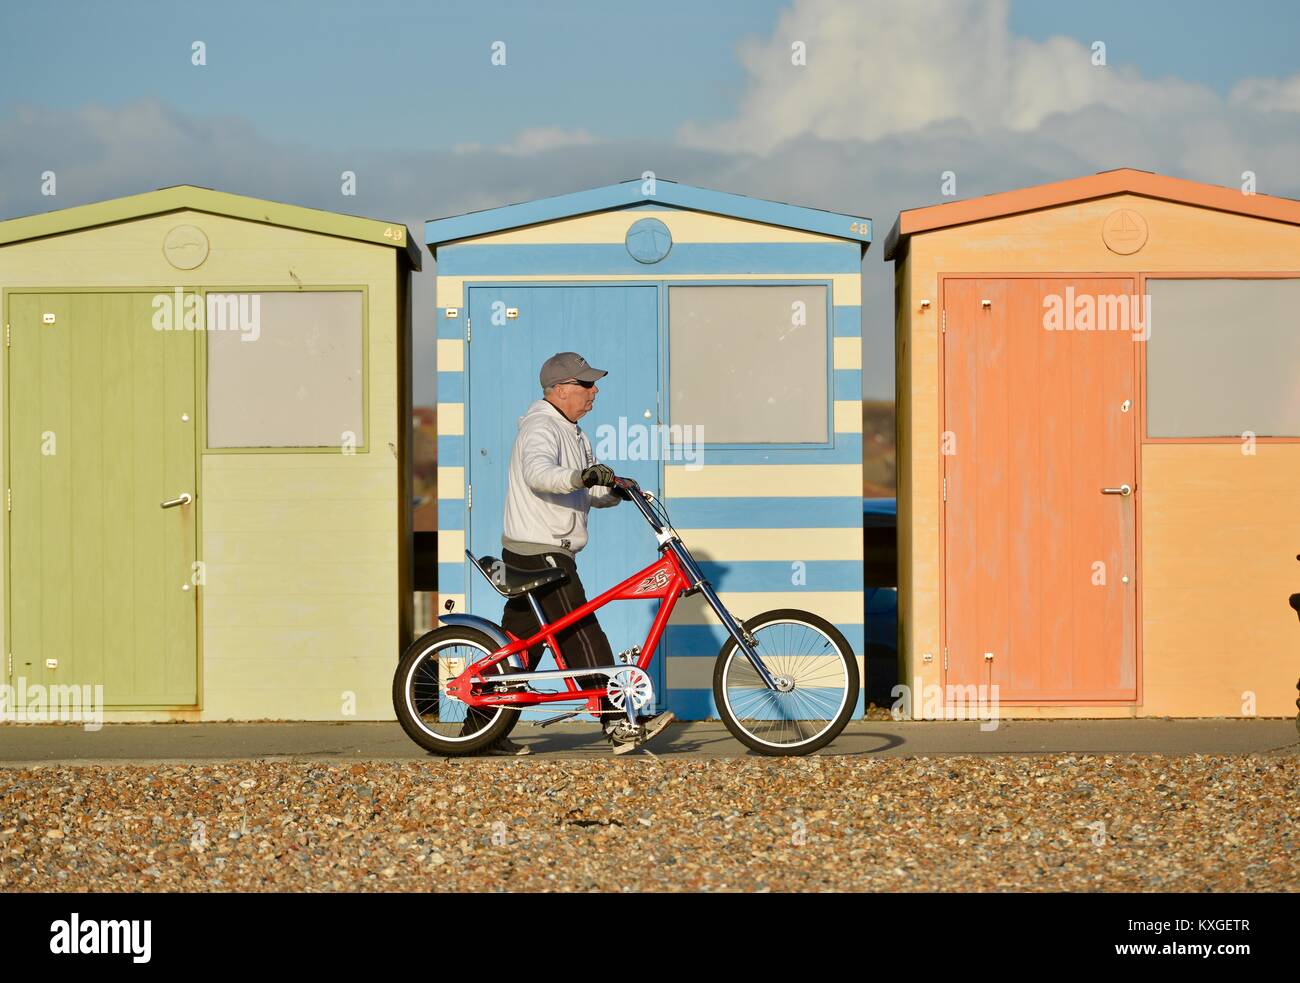 Seaford, East Sussex. 10th January 2018. People enjoying the sun in Seaford, UK after days of wet and gloomy weather, Credit: Peter Cripps/Alamy Live News Stock Photo